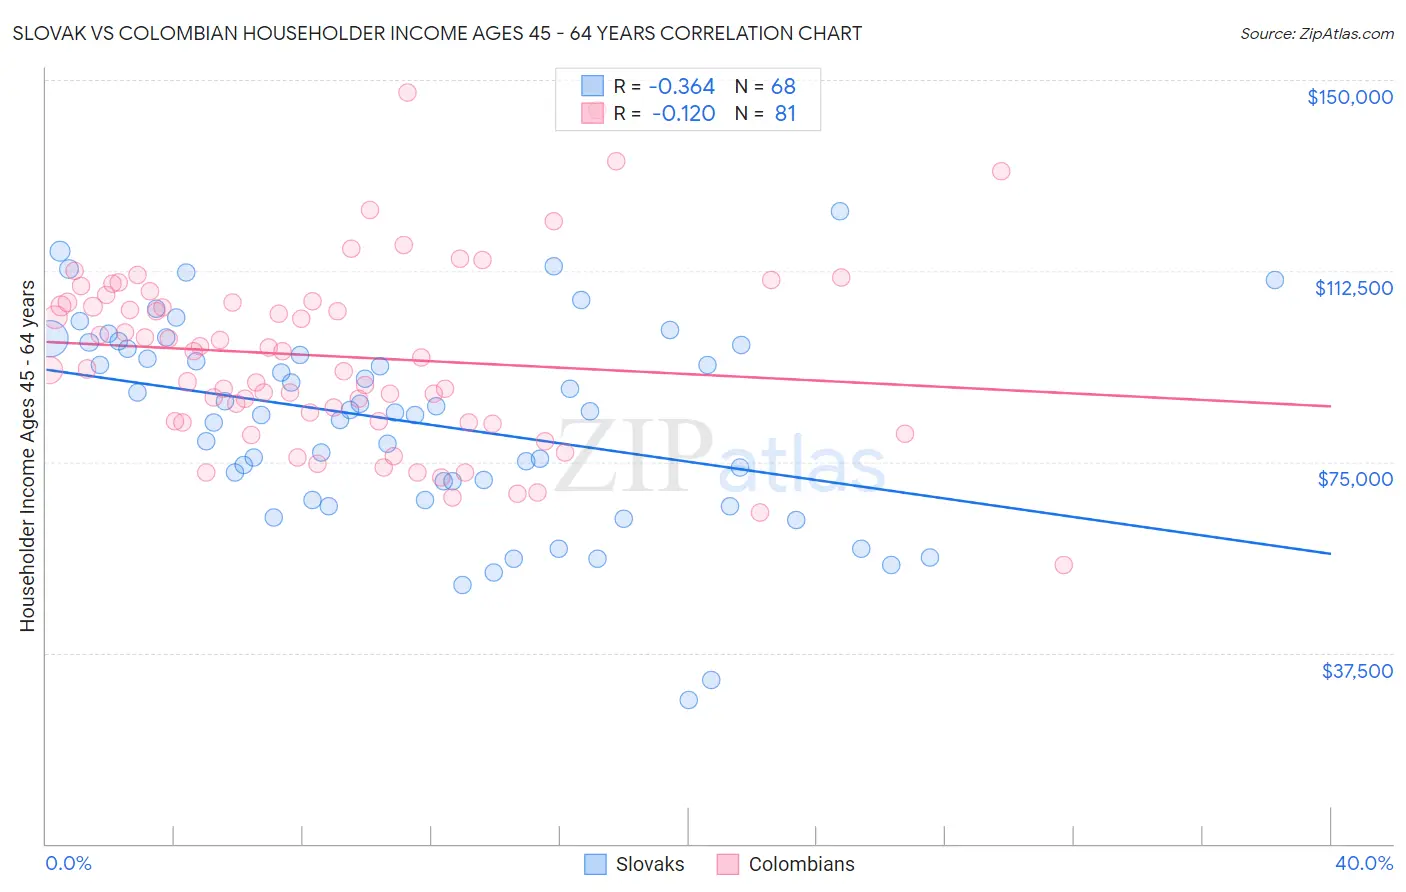 Slovak vs Colombian Householder Income Ages 45 - 64 years